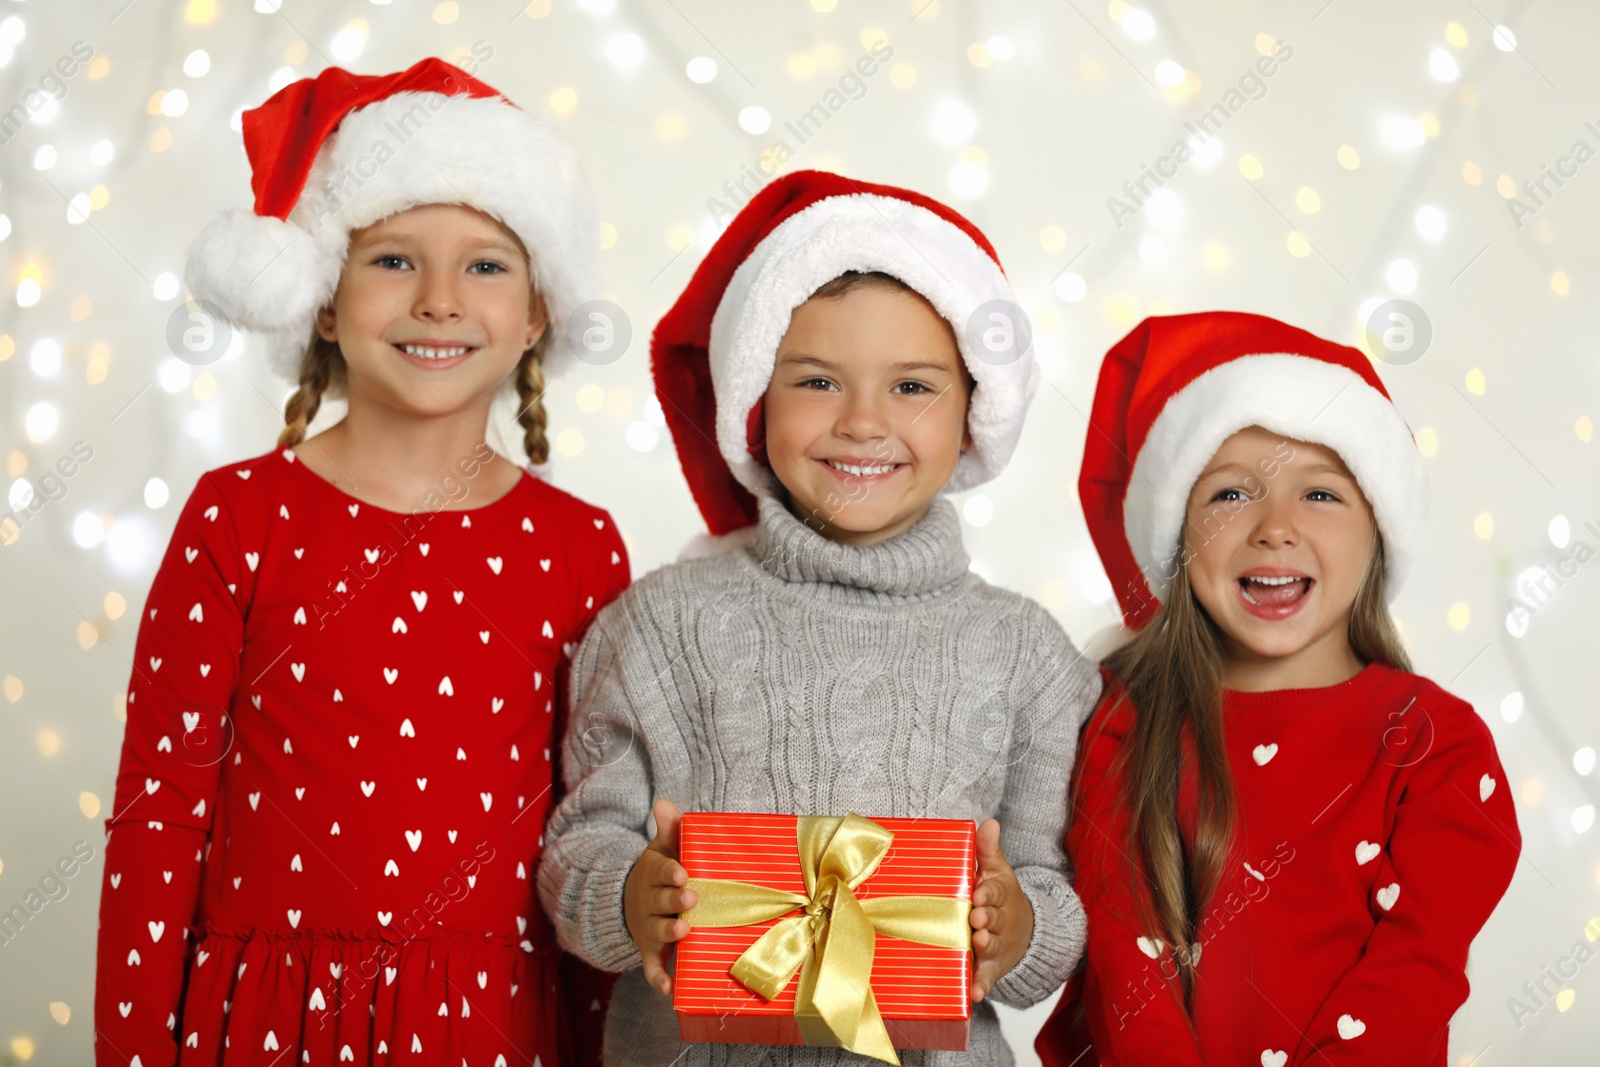 Photo of Happy little children in Santa hats with gift box against blurred festive lights. Christmas celebration